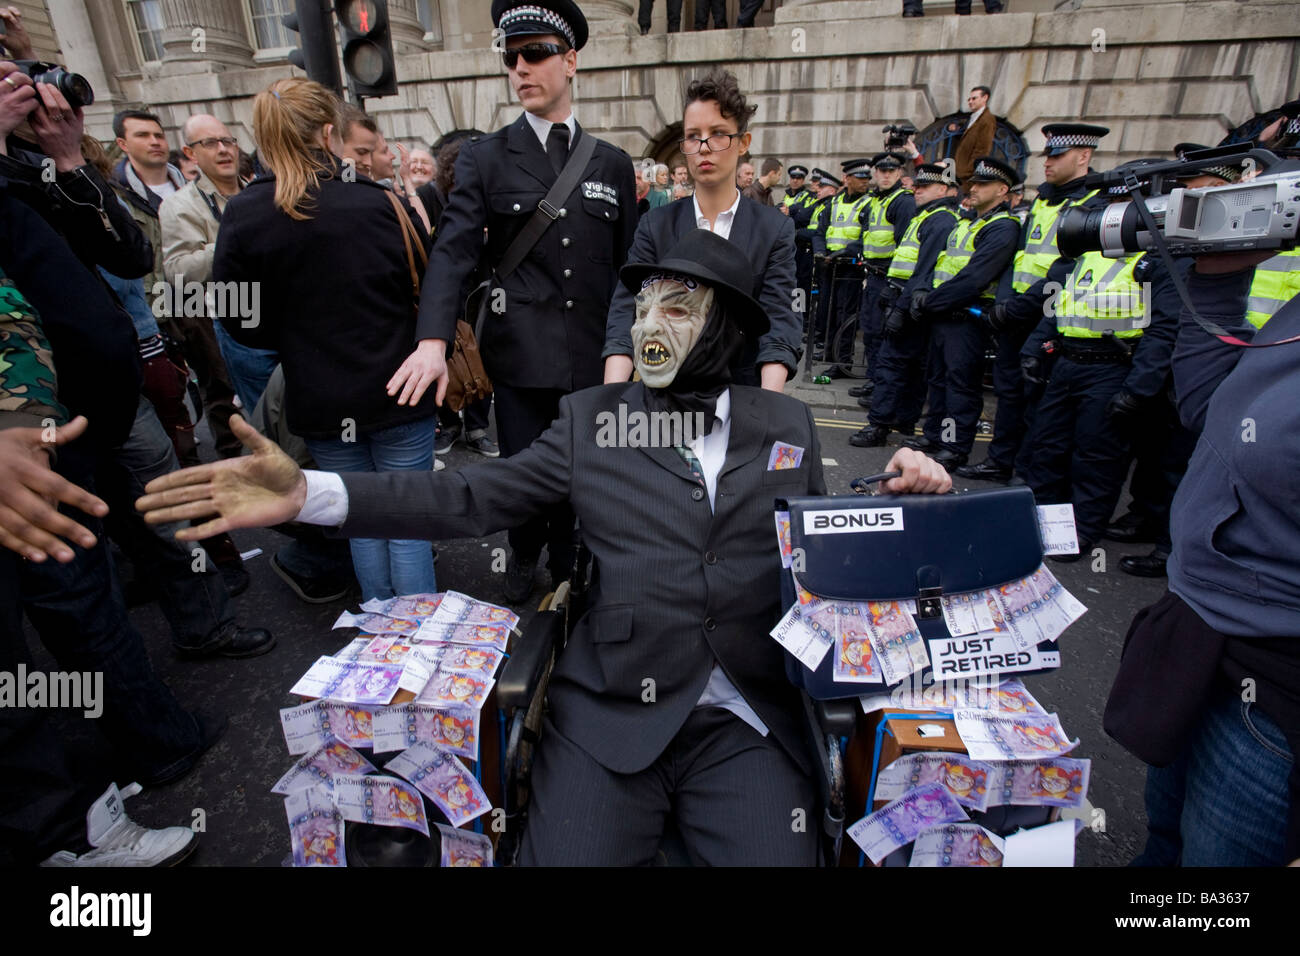 A man with mask and costume in a wheelchair protests banking bonuses at the G20 protest at Bank of England Stock Photo